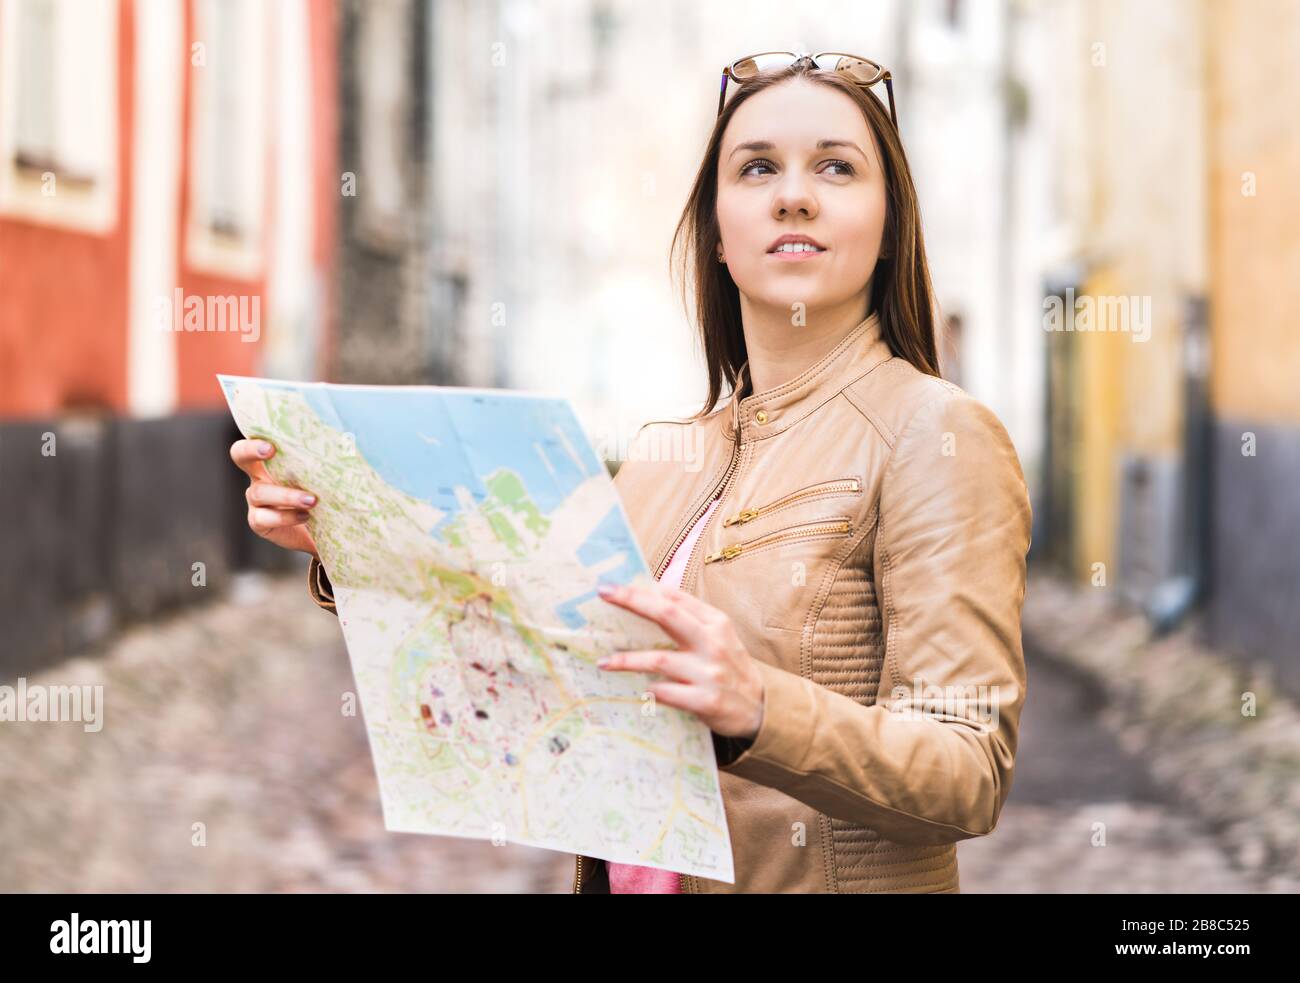 Female traveler with map. Woman traveling. Determined and confident person exploring the world. Freedom and wanderlust. Urban stylish lifestyle. Stock Photo